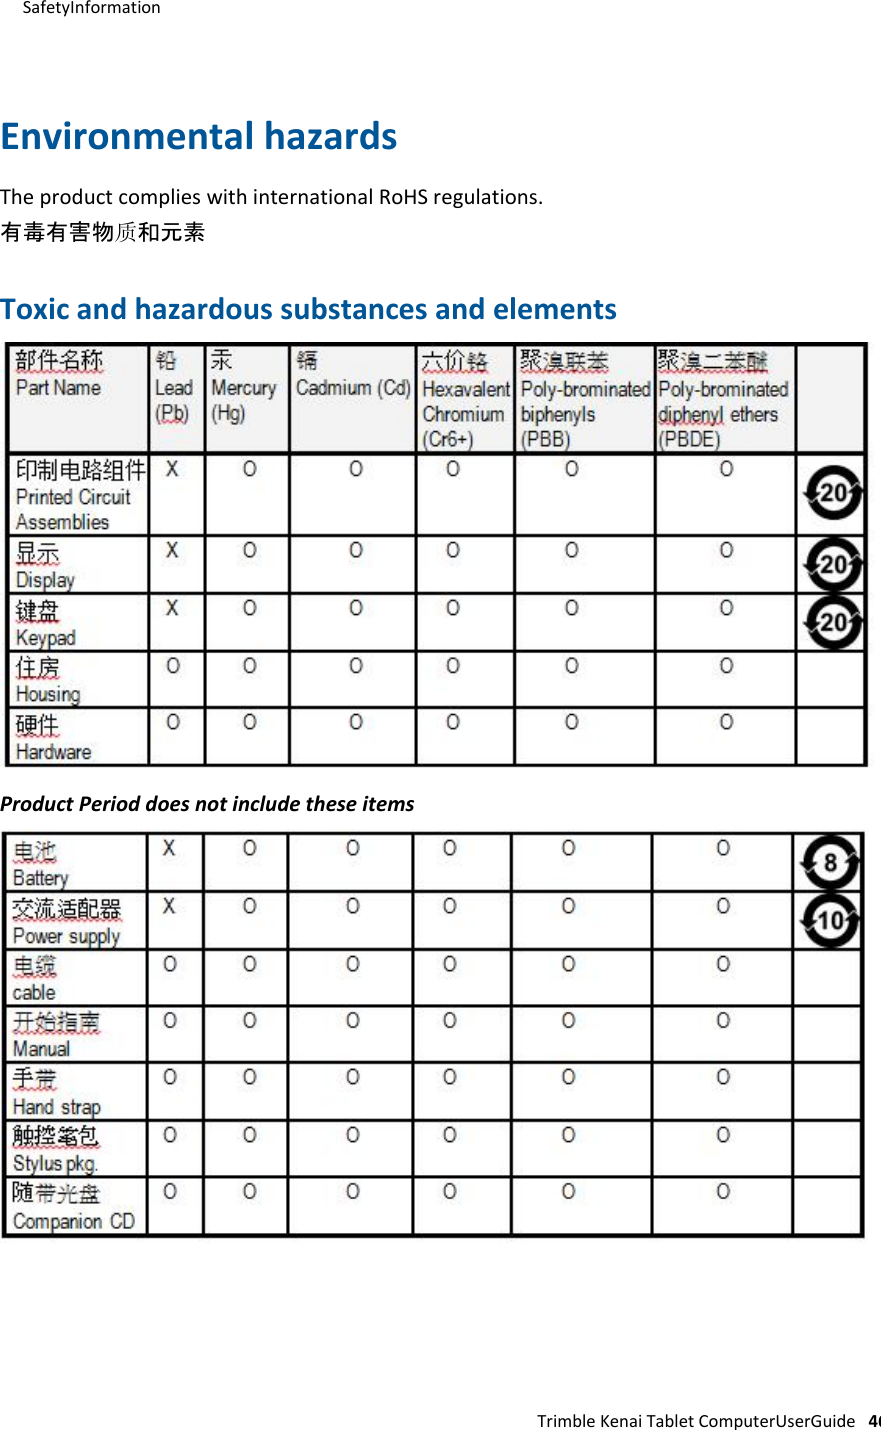 SafetyInformation     Environmentalhazards  TheproductcomplieswithinternationalRoHSregulations.  有毒有害物质和元素   Toxicandhazardoussubstancesandelements                       ProductPerioddoesnotincludetheseitems                             TrimbleKenaiTabletComputerUserGuide46 